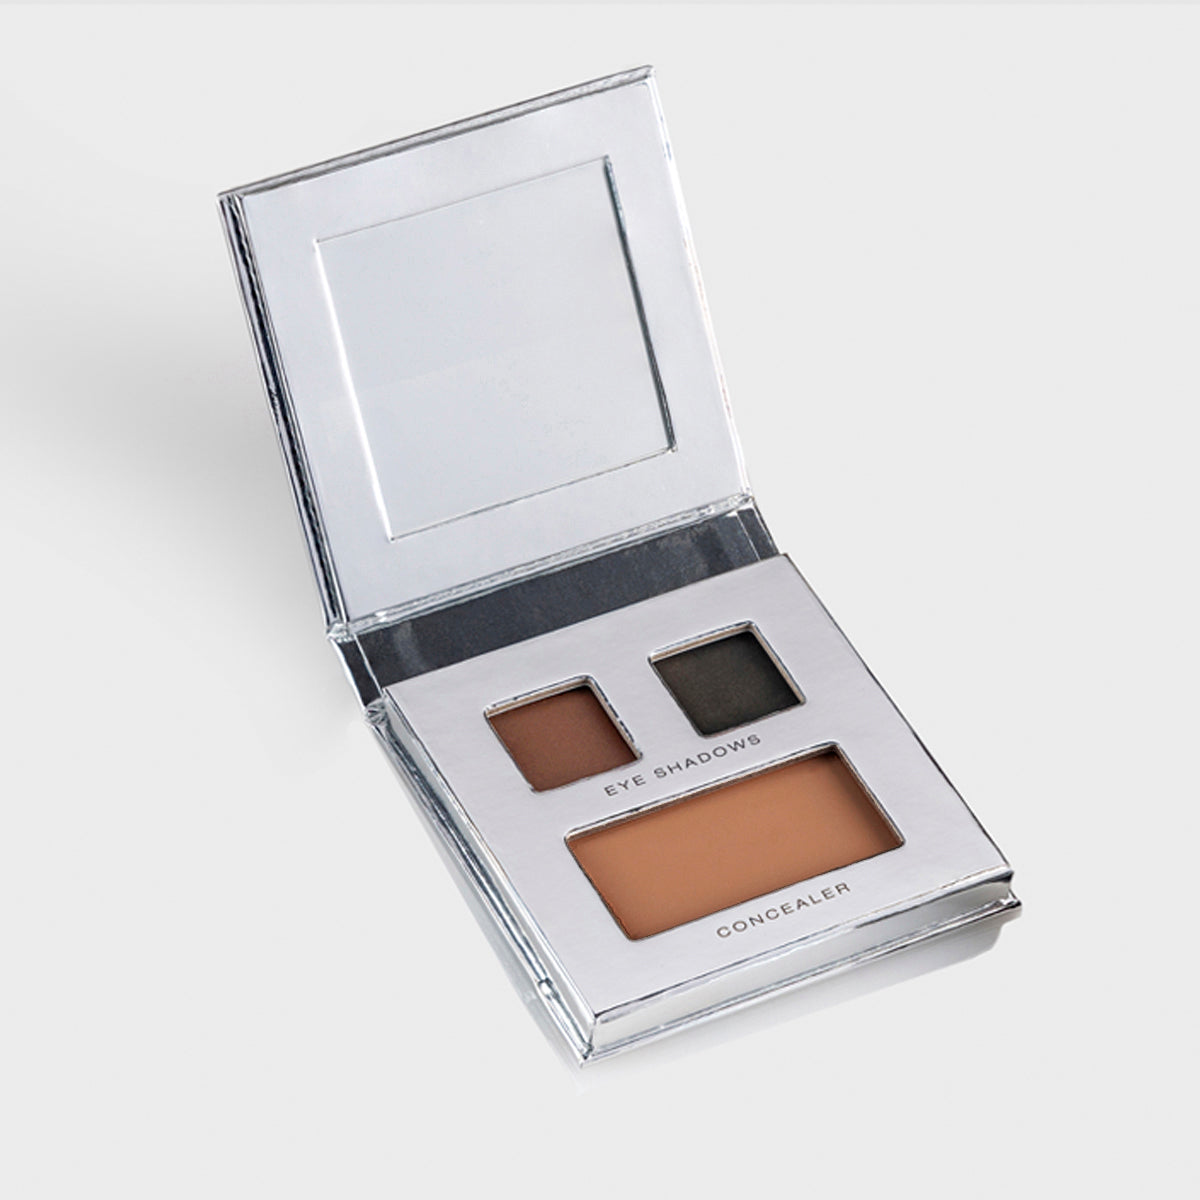 Fold Out Eyes Palette with Brown & Black Eyeshadow with concealer. Includes a mirror. In Shade Toffee. 